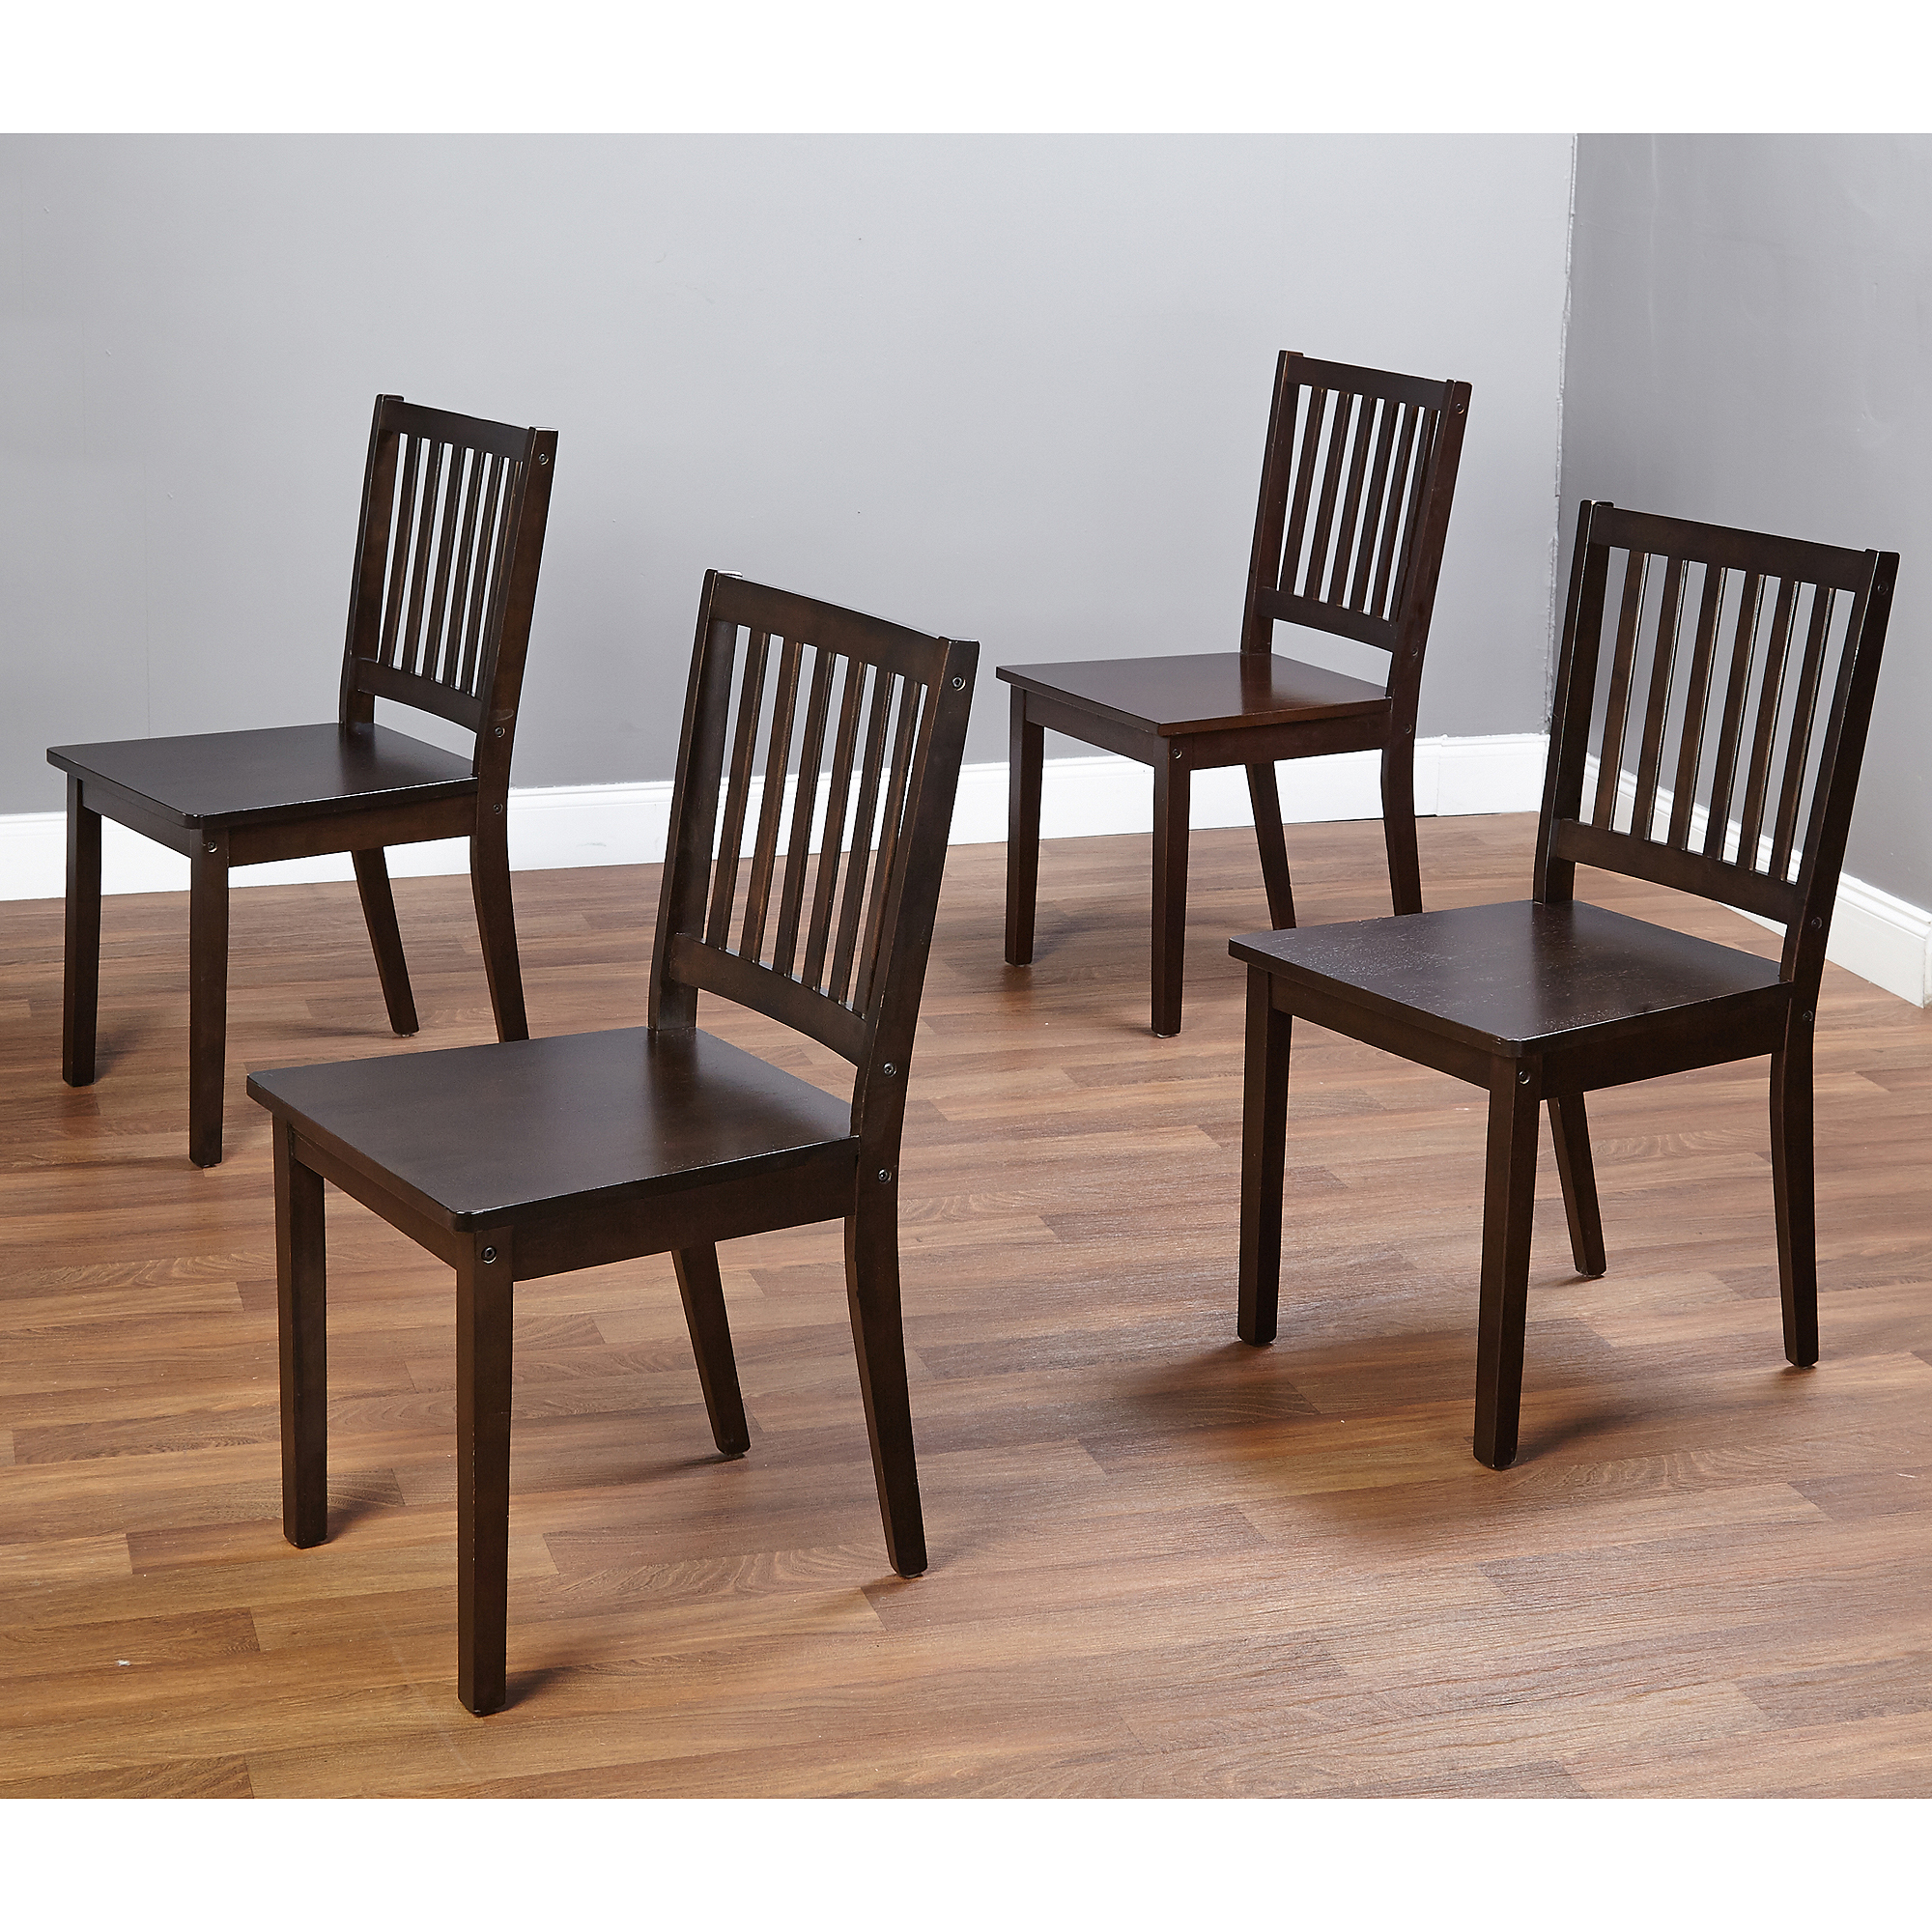 Shaker Dining Chairs, Set of 4, Espresso - image 2 of 2